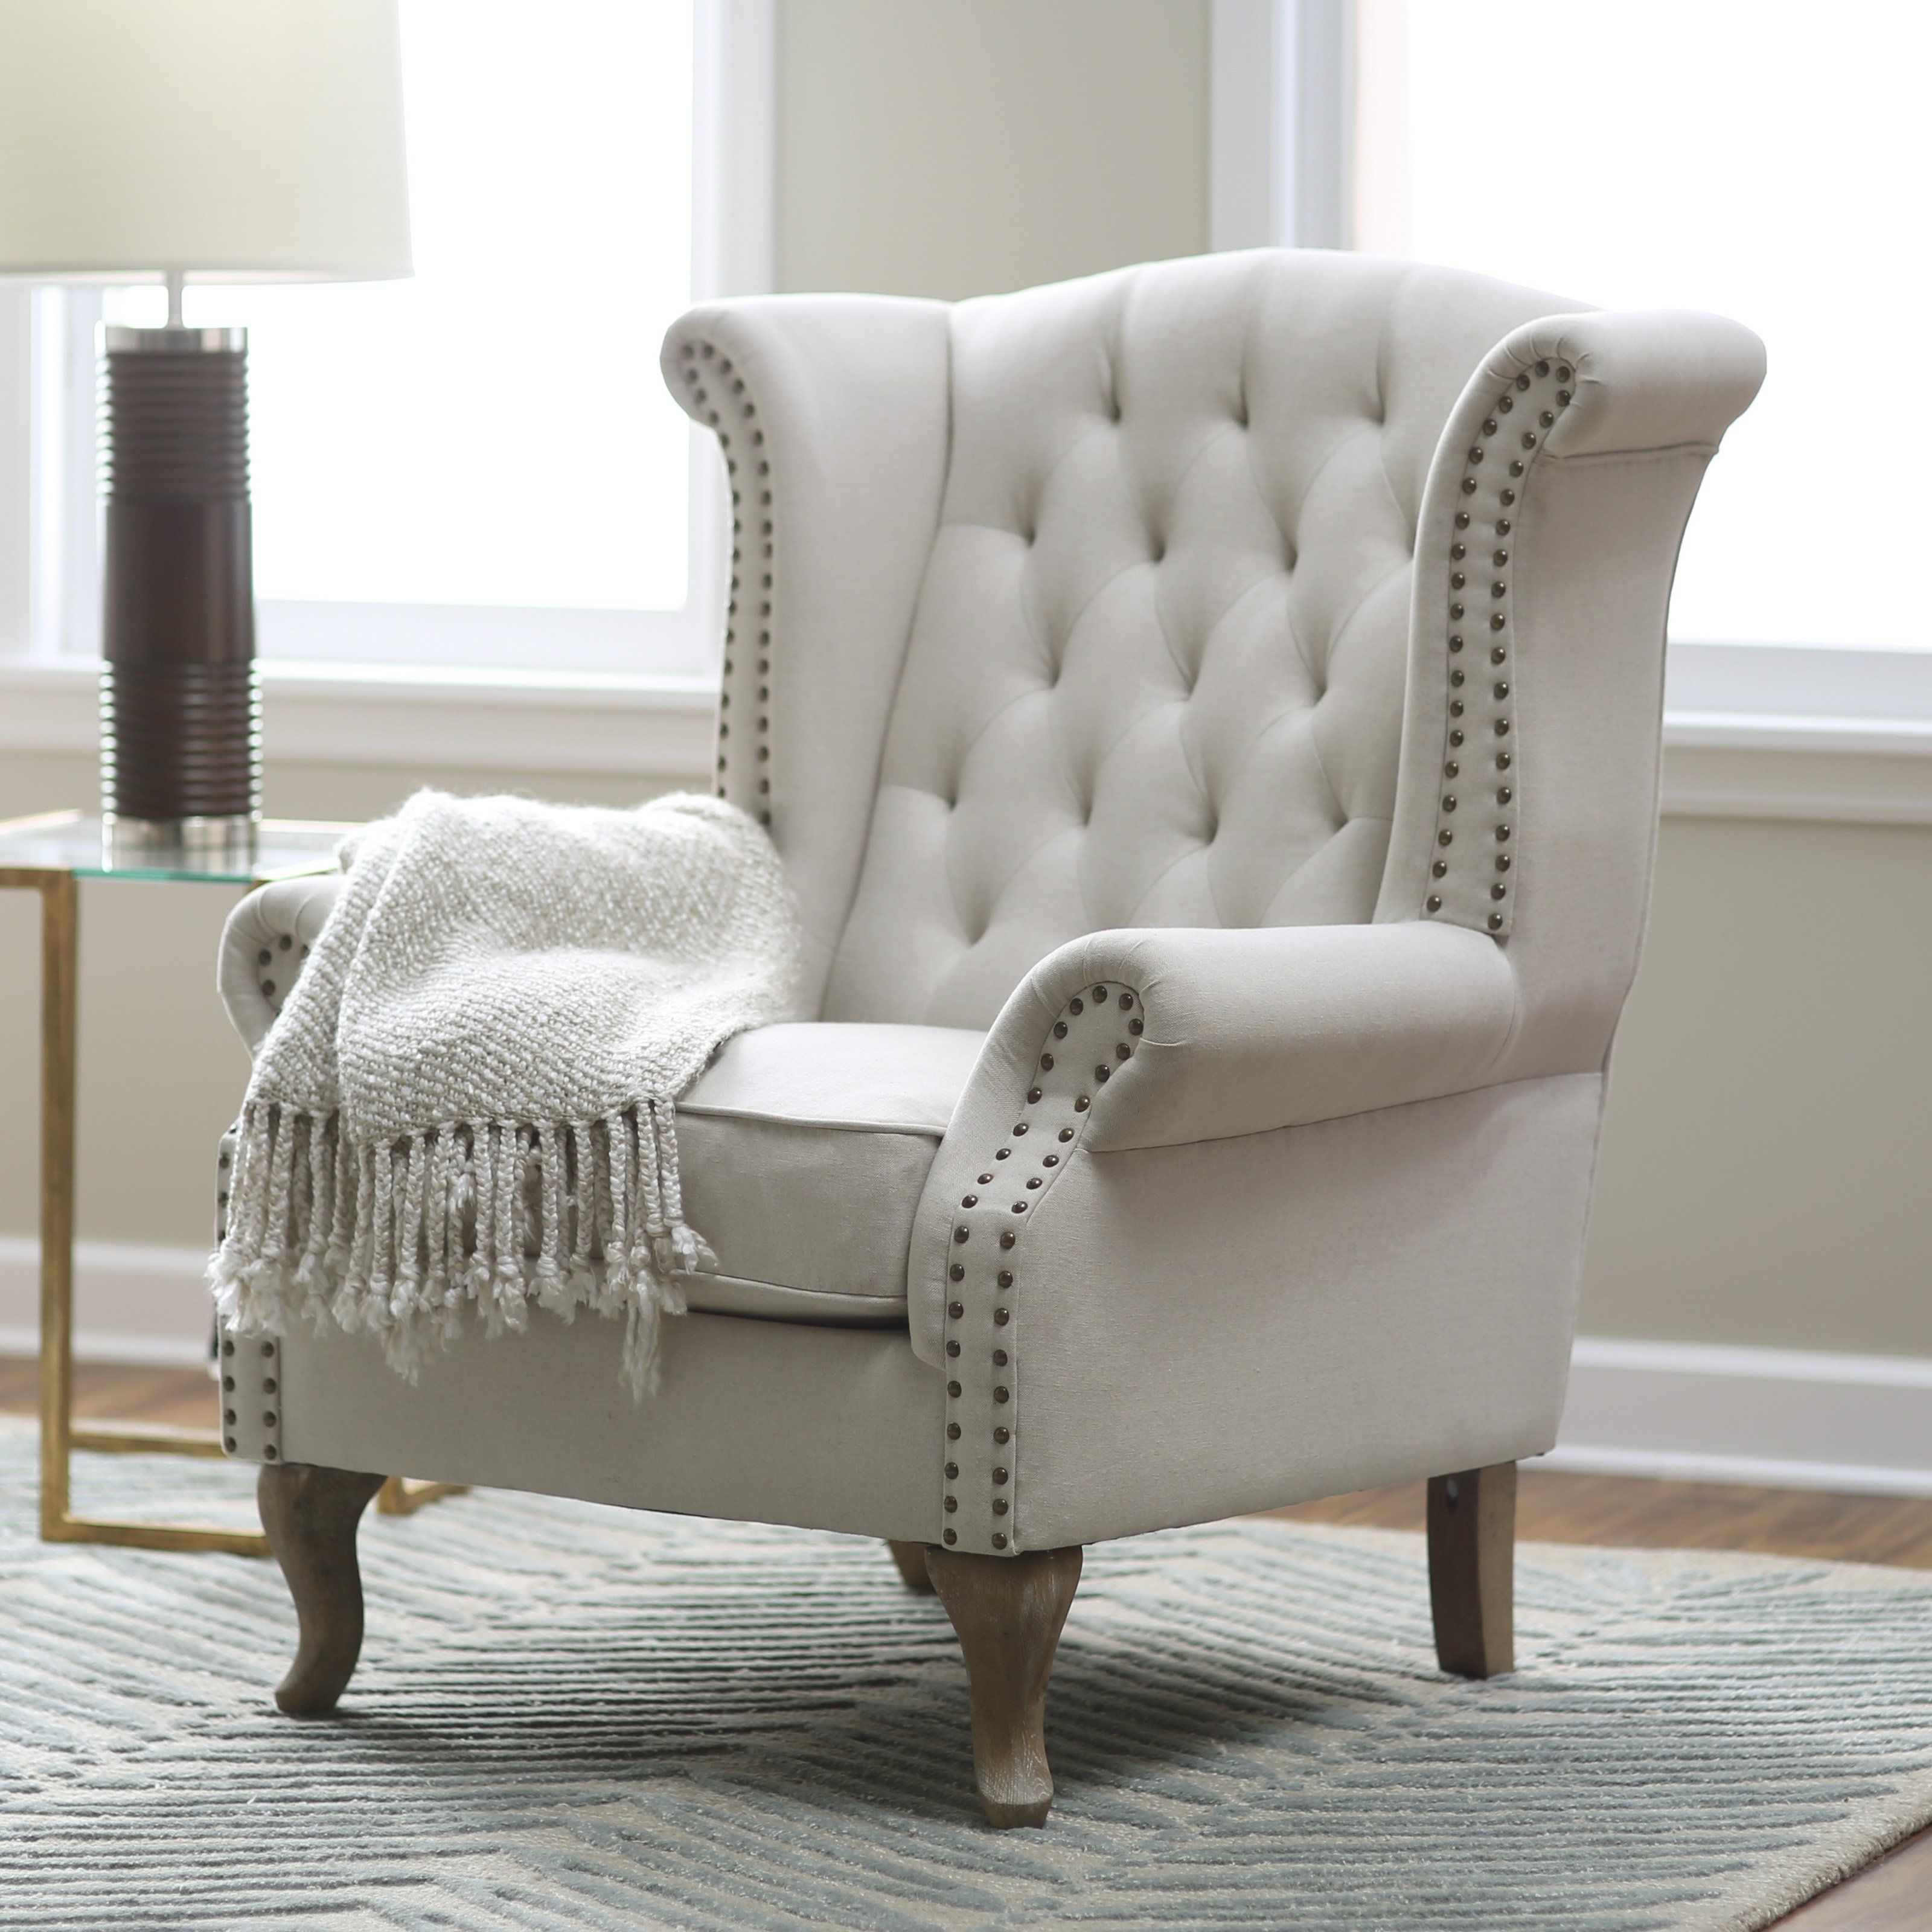 Belham Living Tatum Tufted Arm Chair With Nailheads | Dreamhome Inside Patterson Ii Arm Sofa Chairs (View 19 of 20)